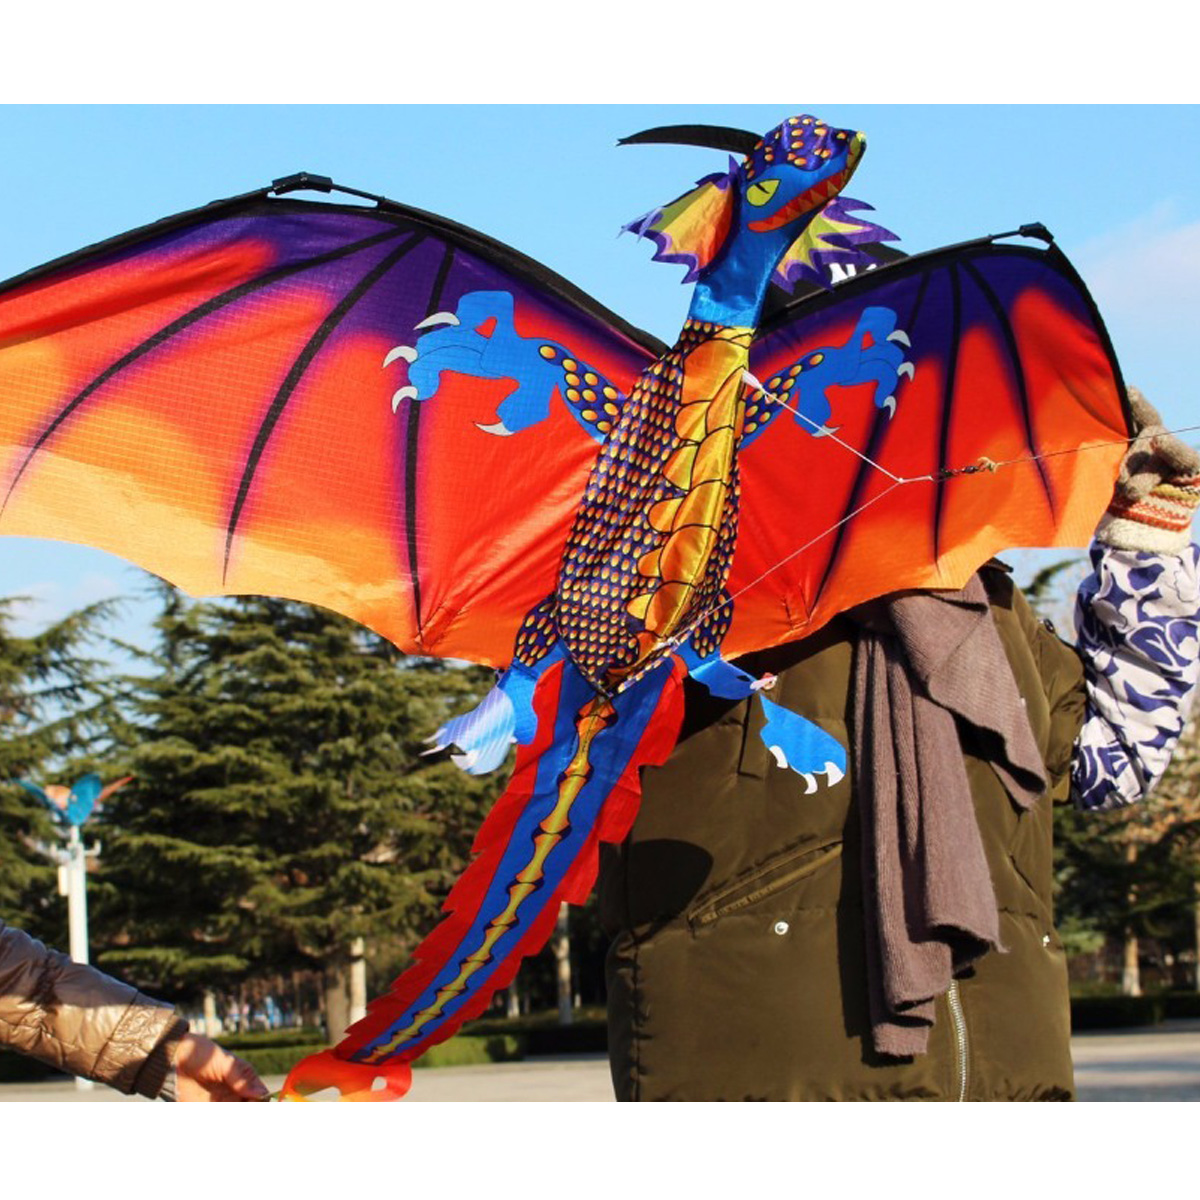 55-Inches-Cute-Classical-Dragon-Kite-140cm-x-120cm-Single-Line-Kite-With-Tail-1171017